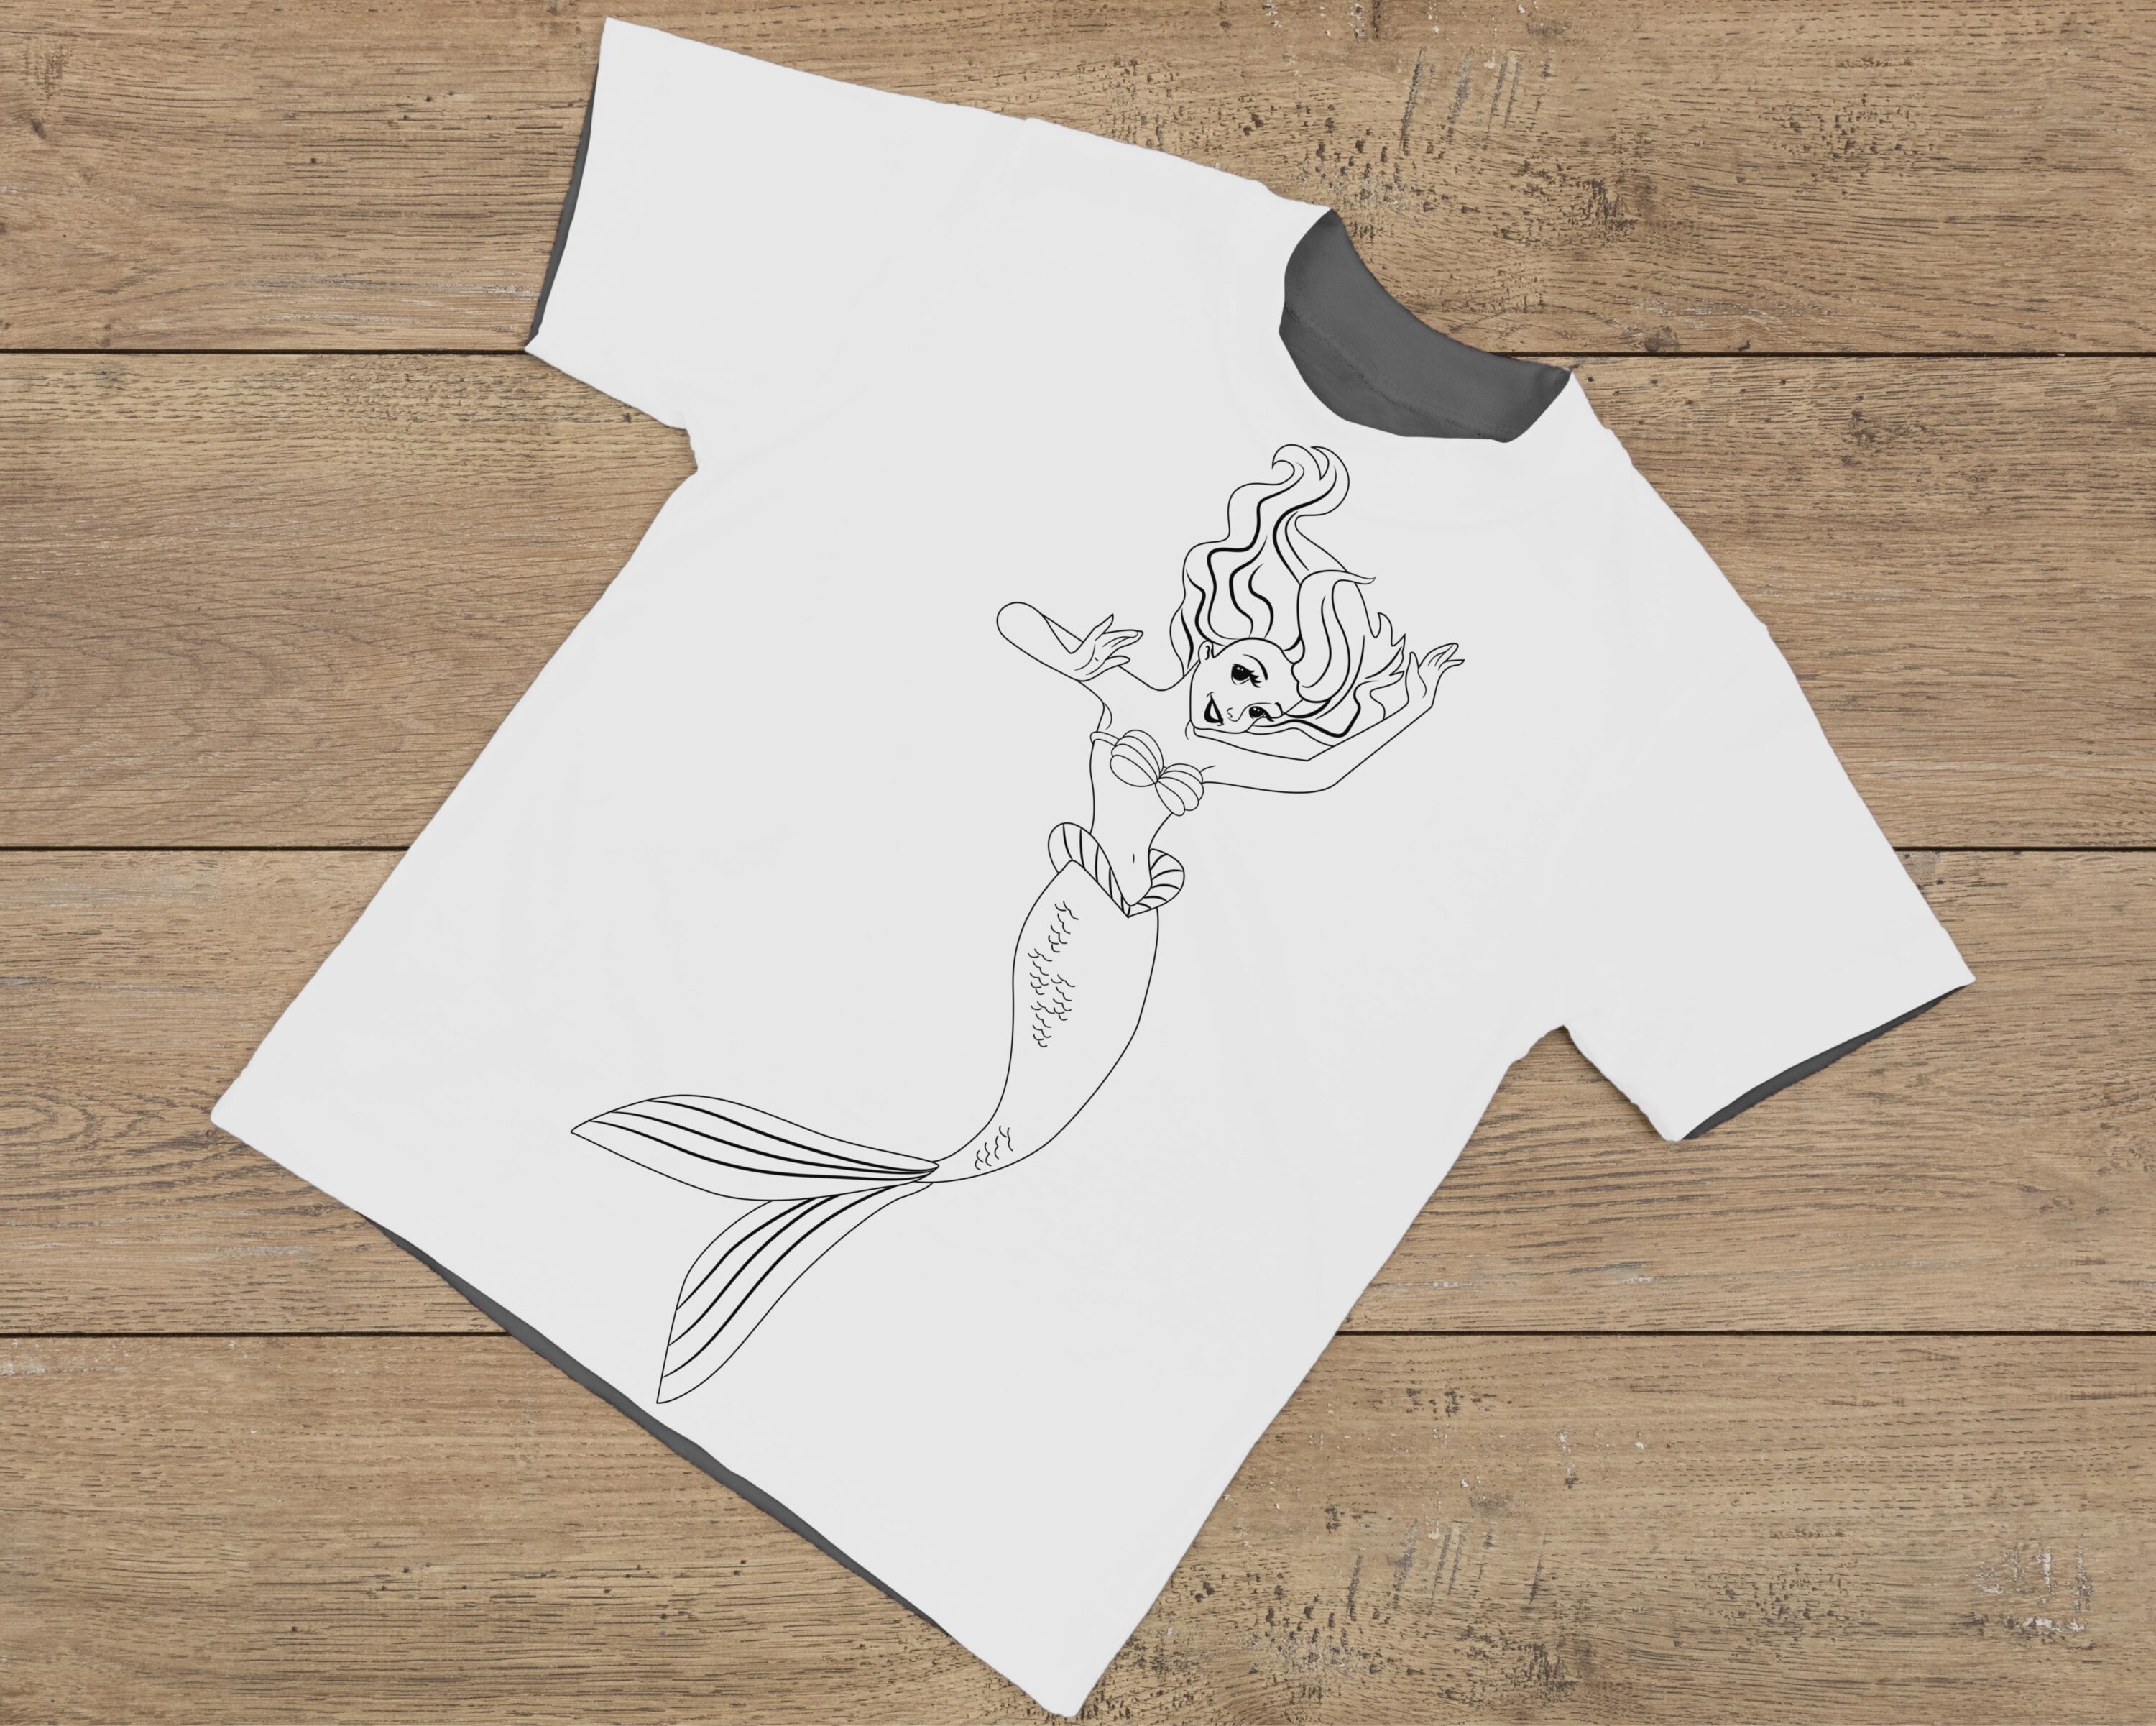 Havre print of mermaids on a T-shirt of a girl in jeans.